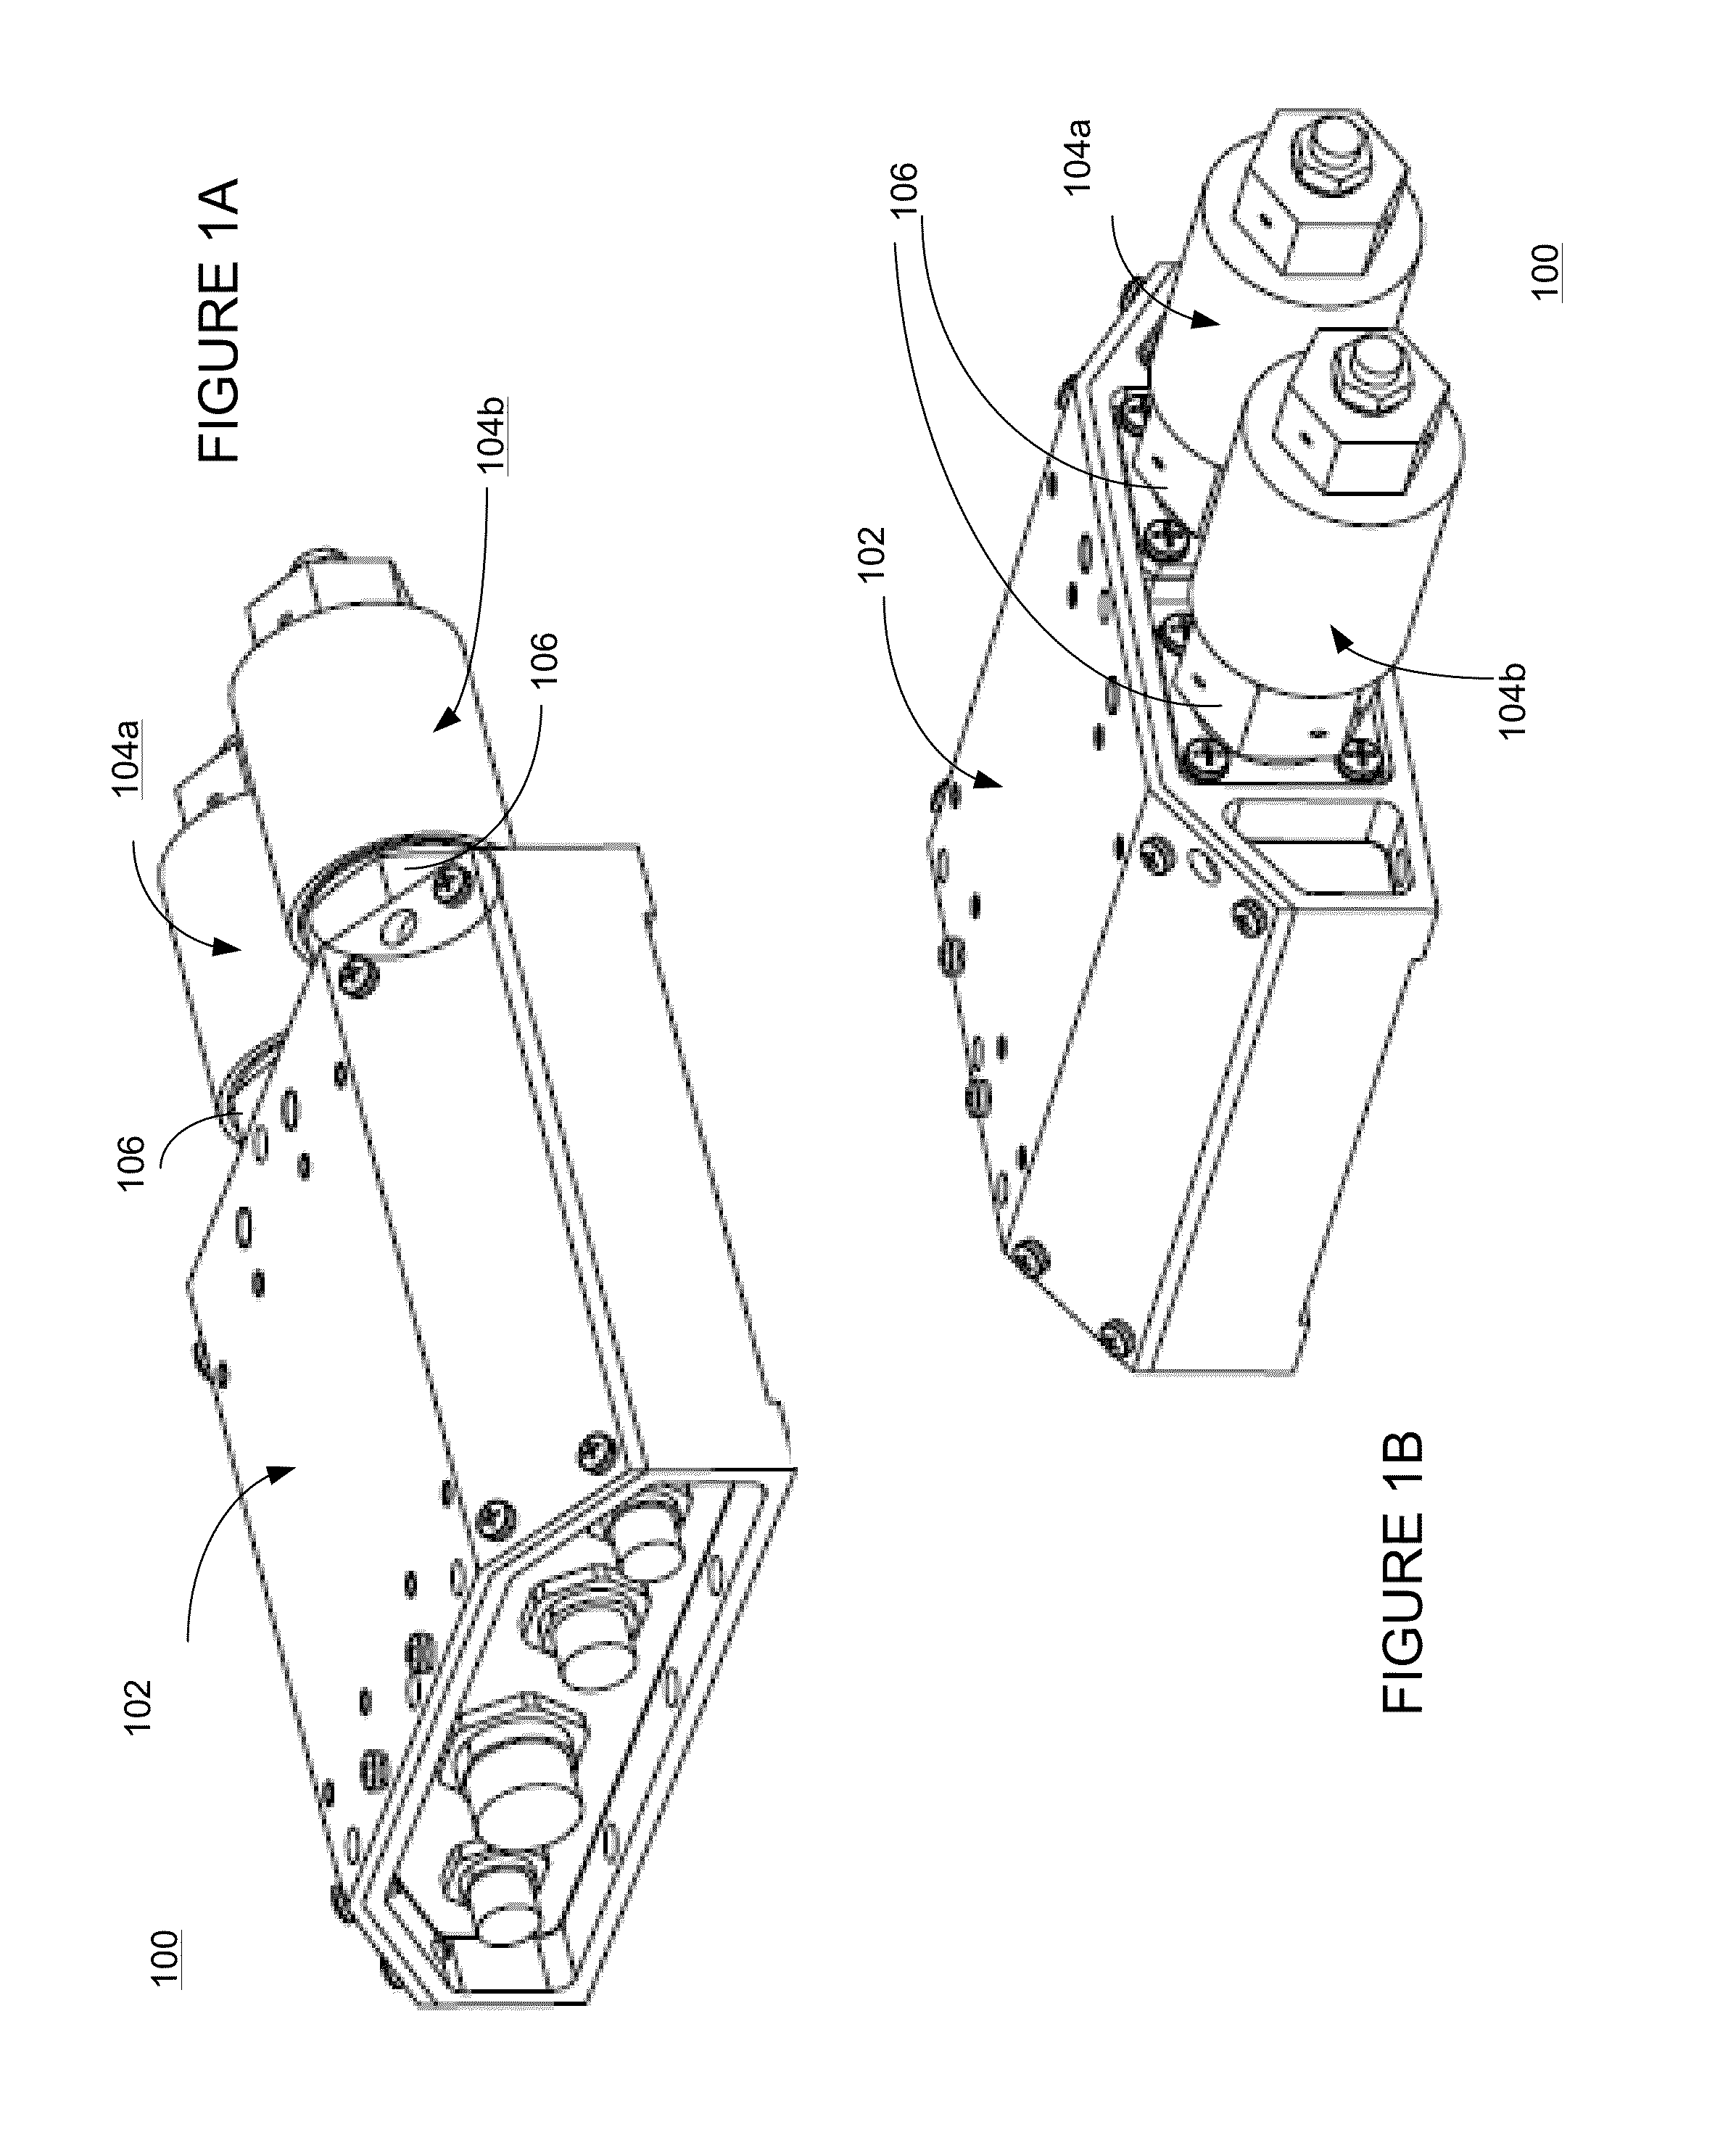 Electronic safe/arm system and methods of use thereof